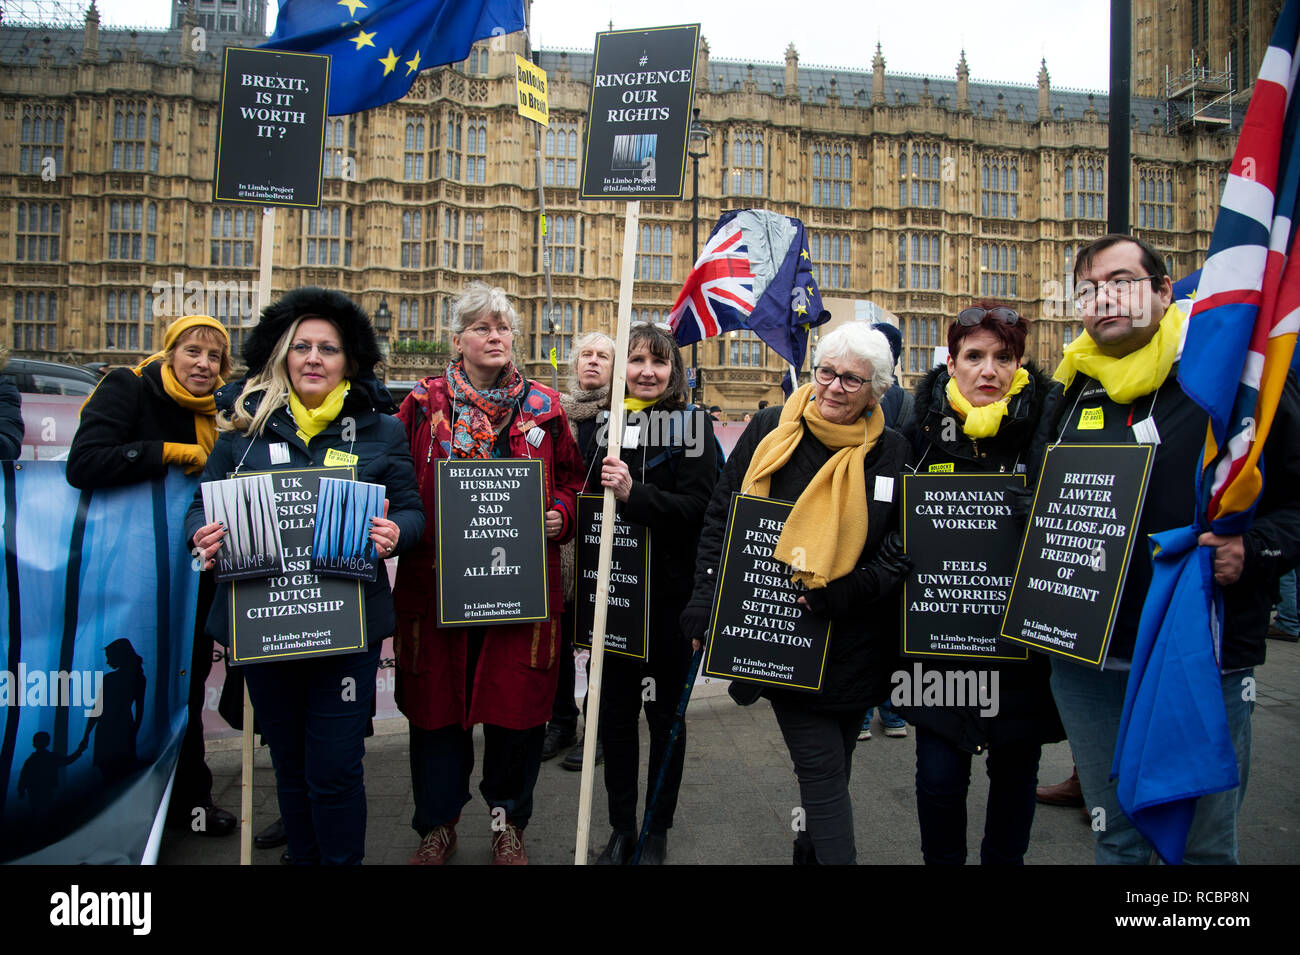 Westminster, London, UK. January 15th 2019. Demonstrations outside the Houses of Parliament as MPS vote on PM Theresa May's Brexit deal. A group of Europeans who feel they are in limbo. Credit: Jenny Matthews/Alamy Live News Stock Photo